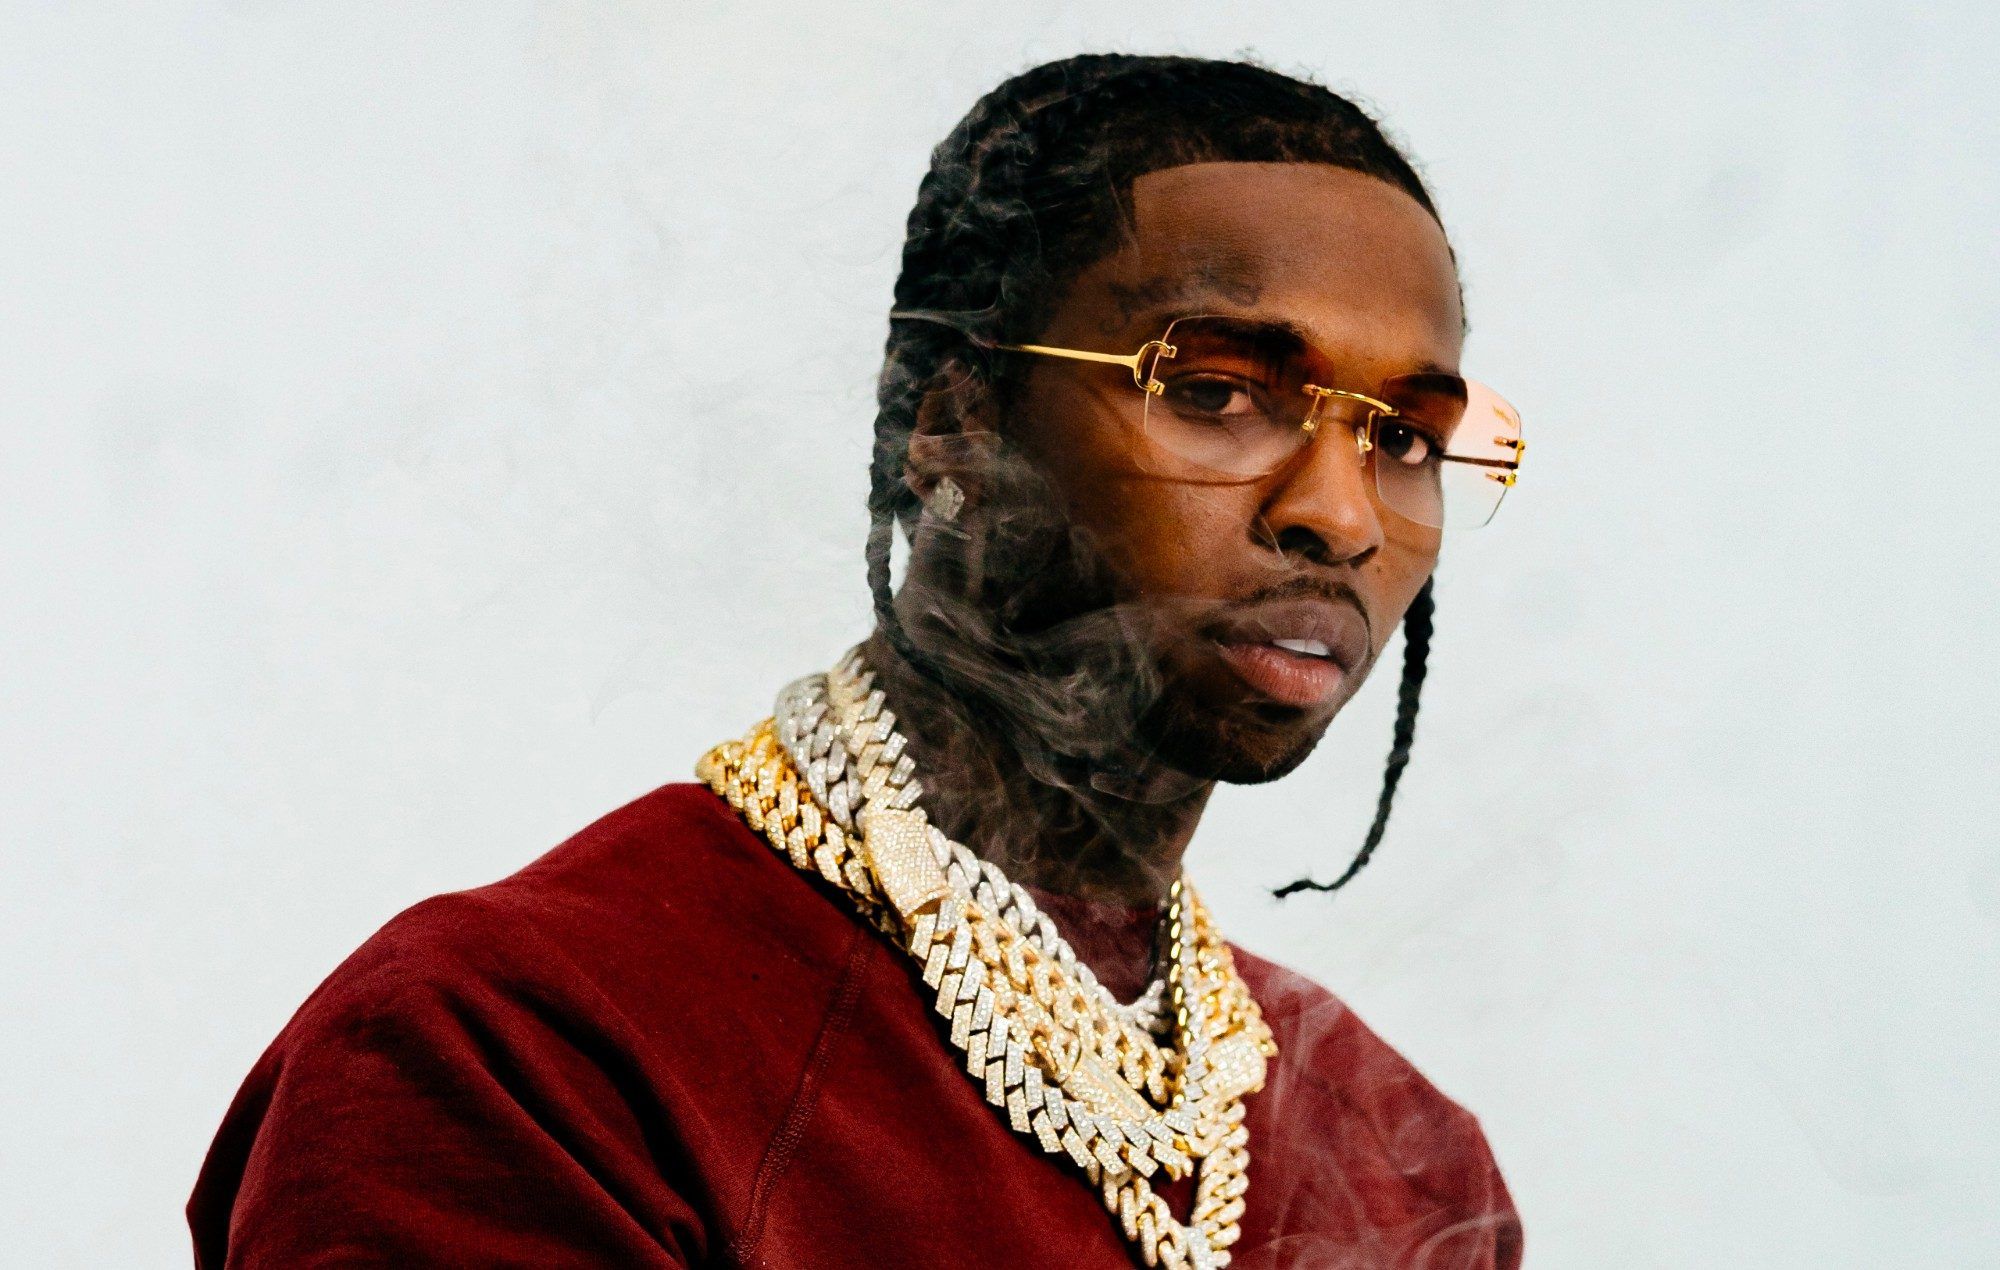 A man with gold chains and glasses - Pop Smoke